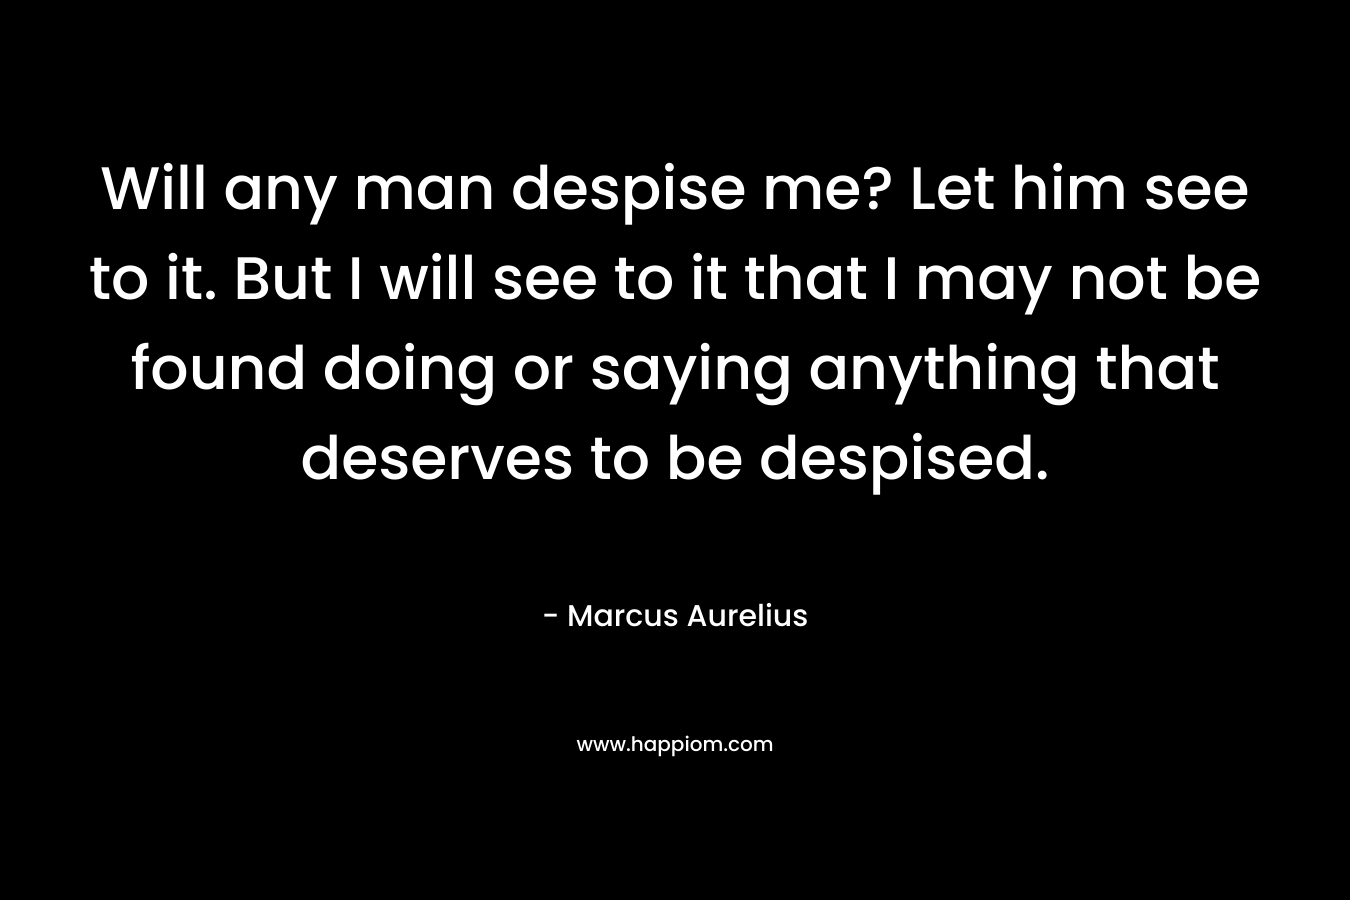 Will any man despise me? Let him see to it. But I will see to it that I may not be found doing or saying anything that deserves to be despised.